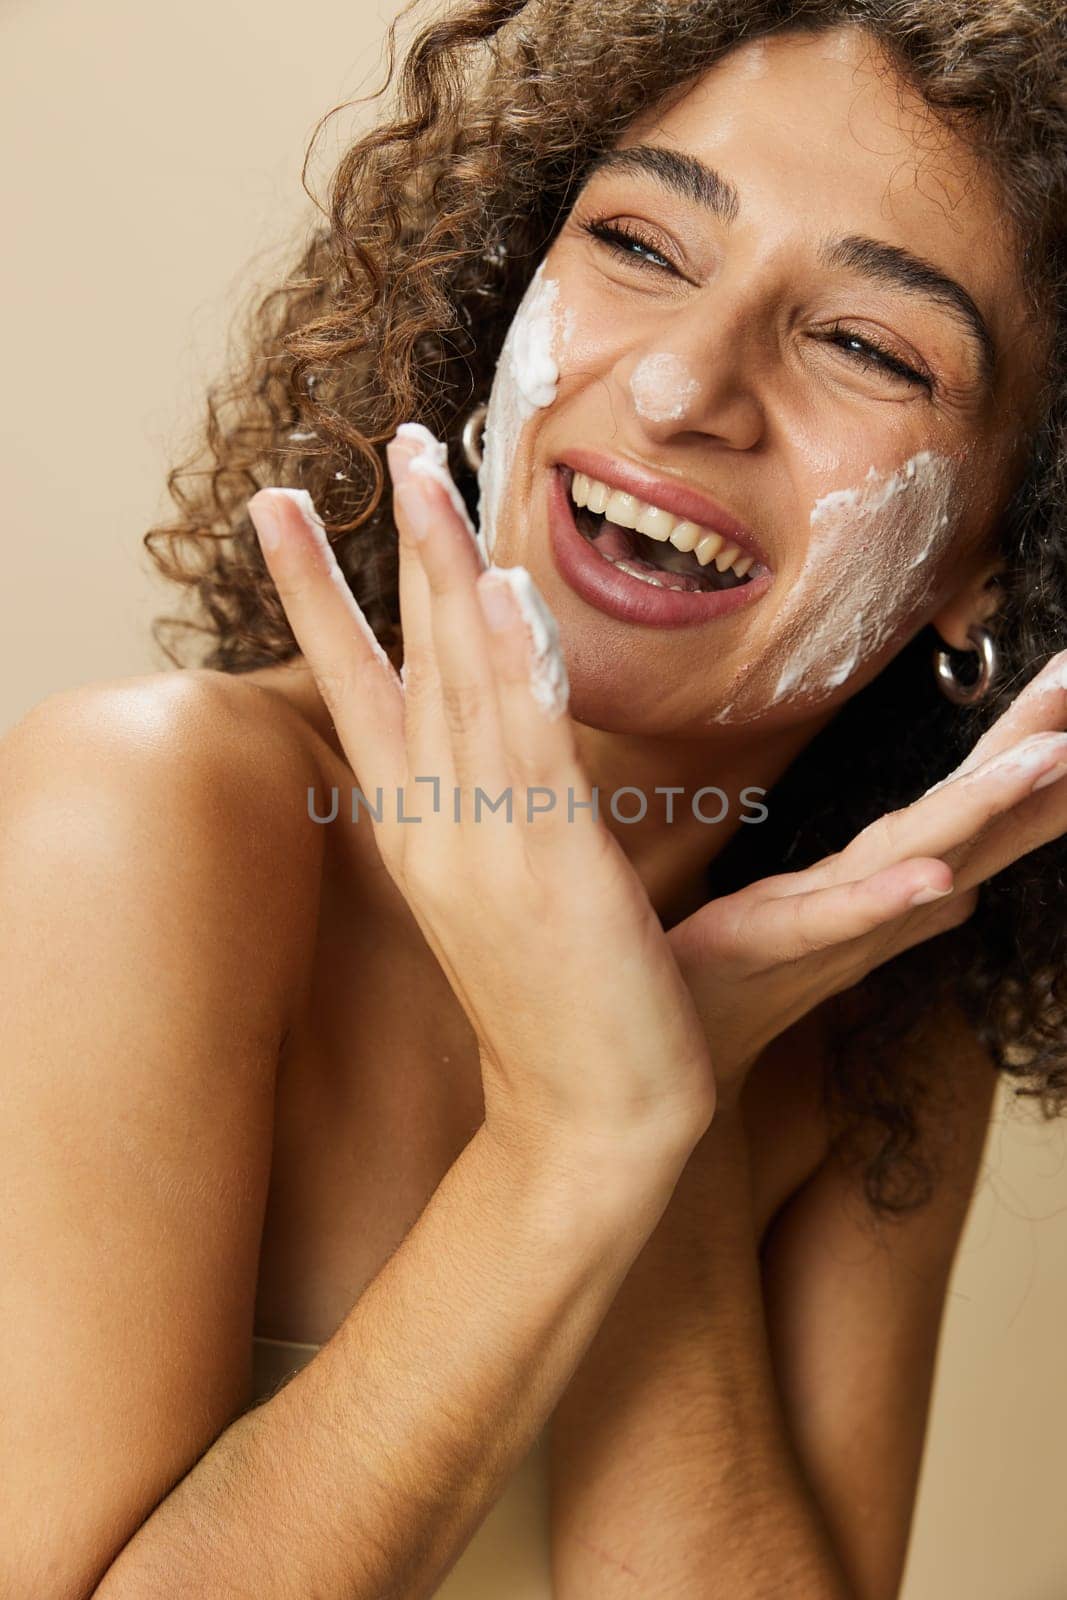 Woman beauty face close-up applying foam to wash and cleanse skin with fingers of her hand, nail and hair health, hair dryer style curly afro hair, body and beauty care concept. High quality photo